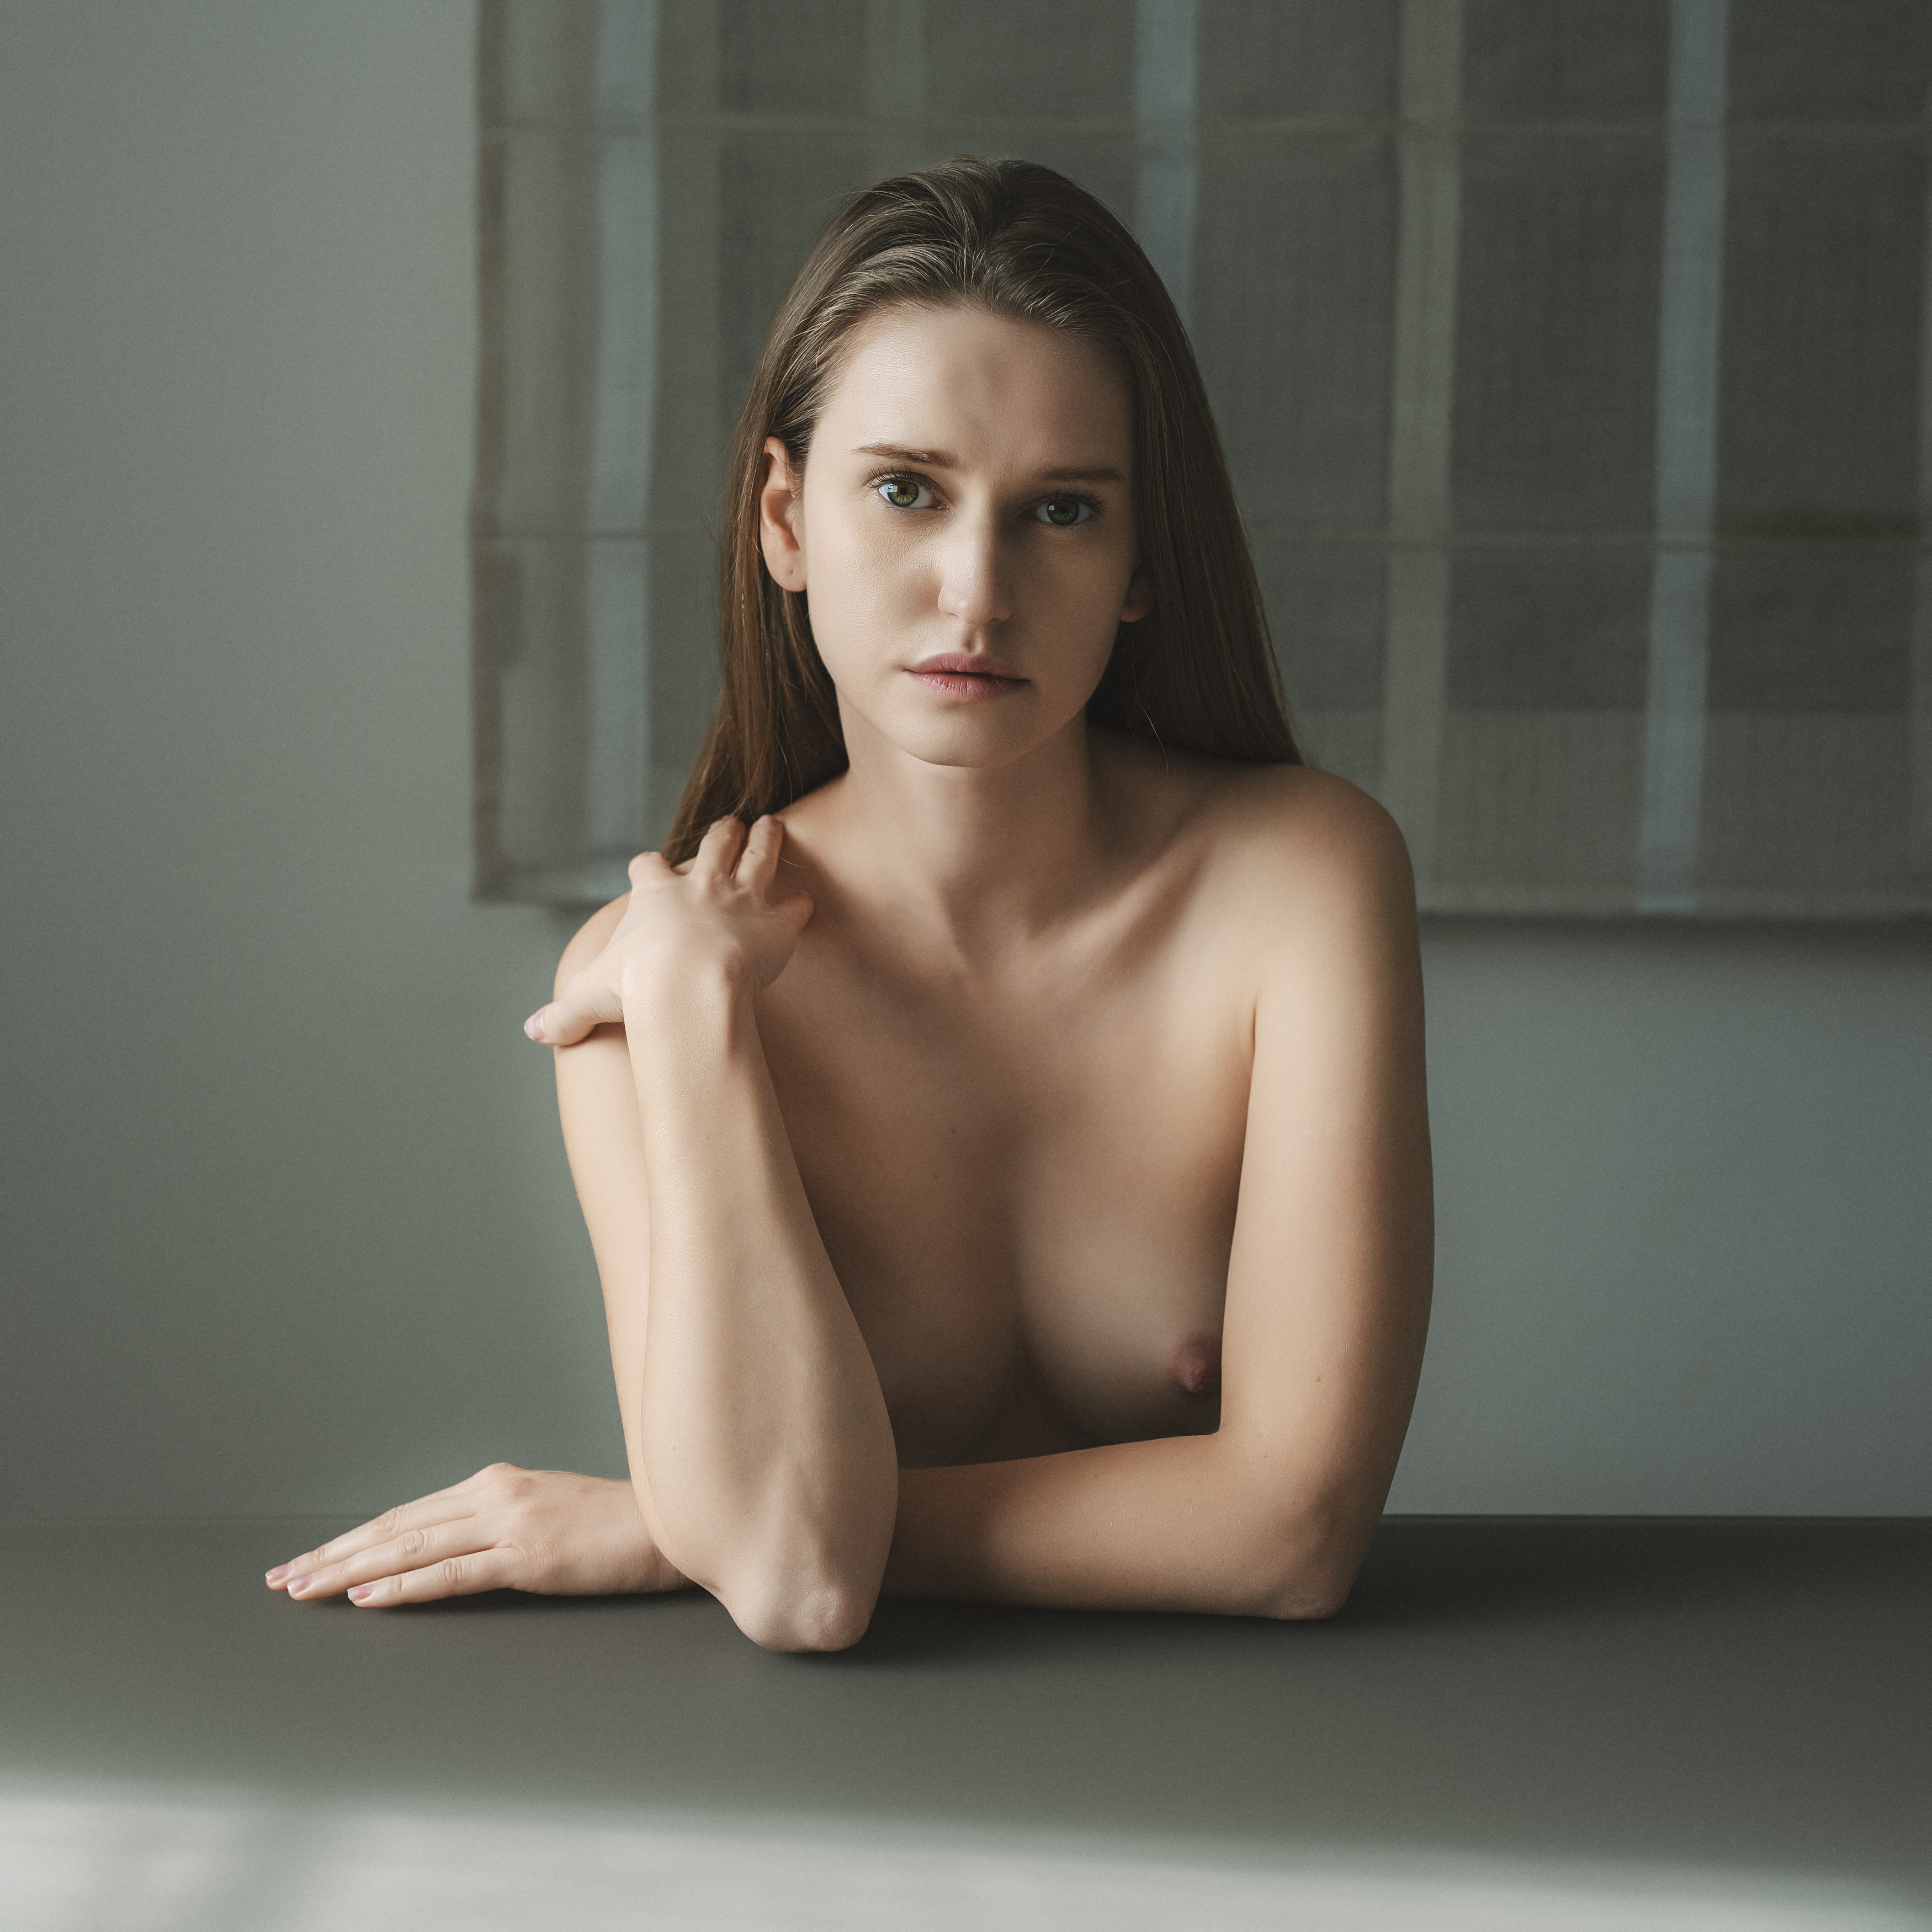 artnude, attractive, beautiful woman, beauty, curtain, dreaminess, female, femininity, front view, individuality, indoors, lifestyles, looking at camera, naked, nude, one person, portrait, seductive women, sensuality, sitting, table, window, young women, Alex Tsarfin